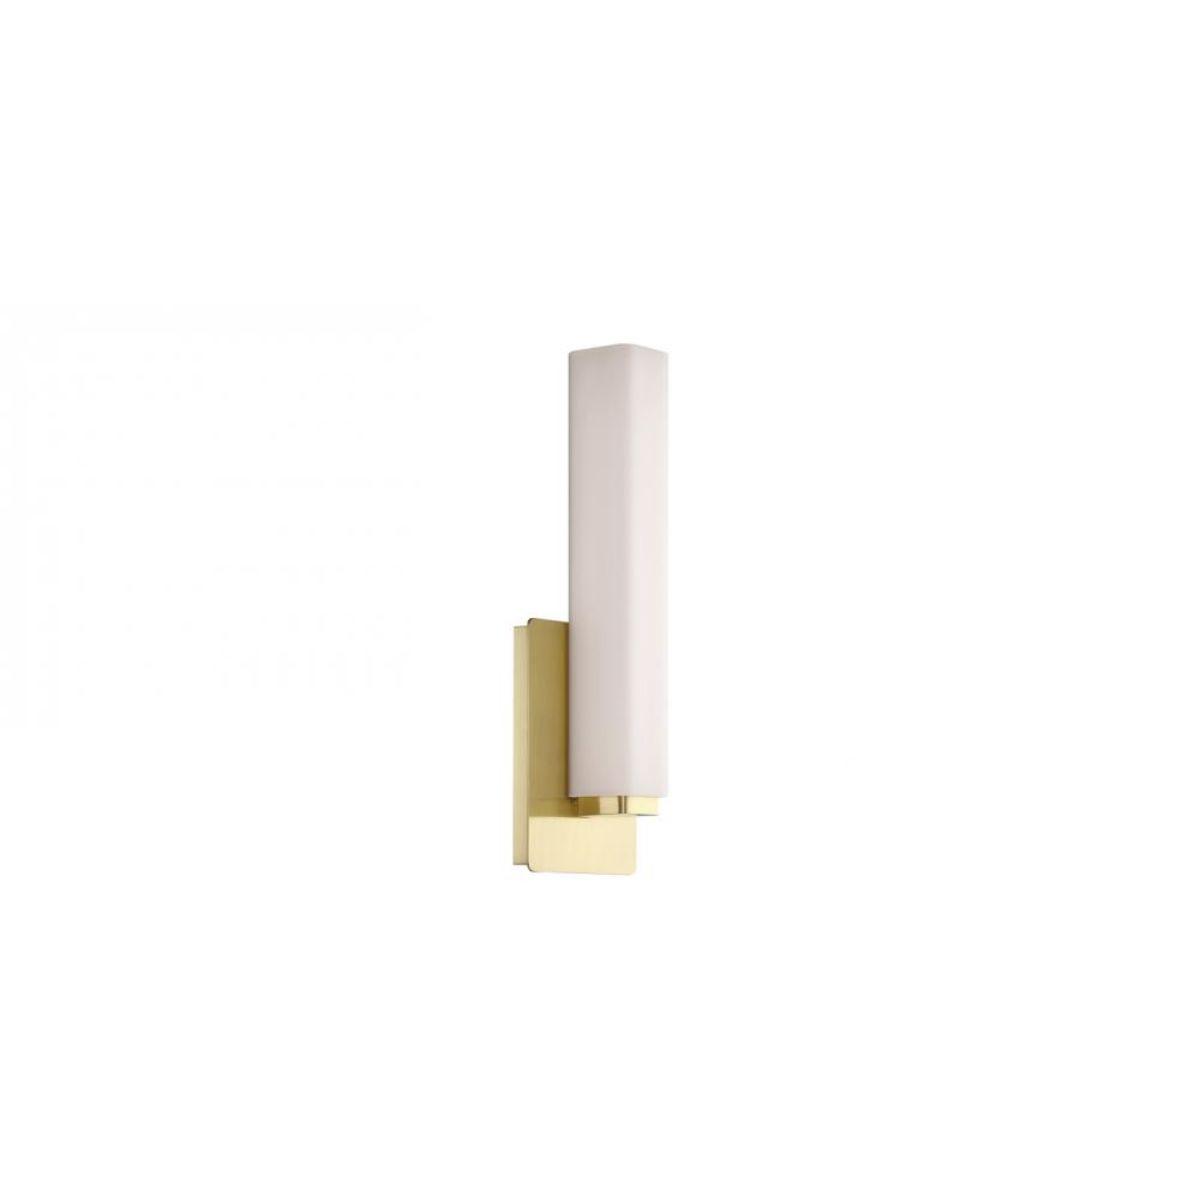 Vogue 11 in. LED Armed Sconce